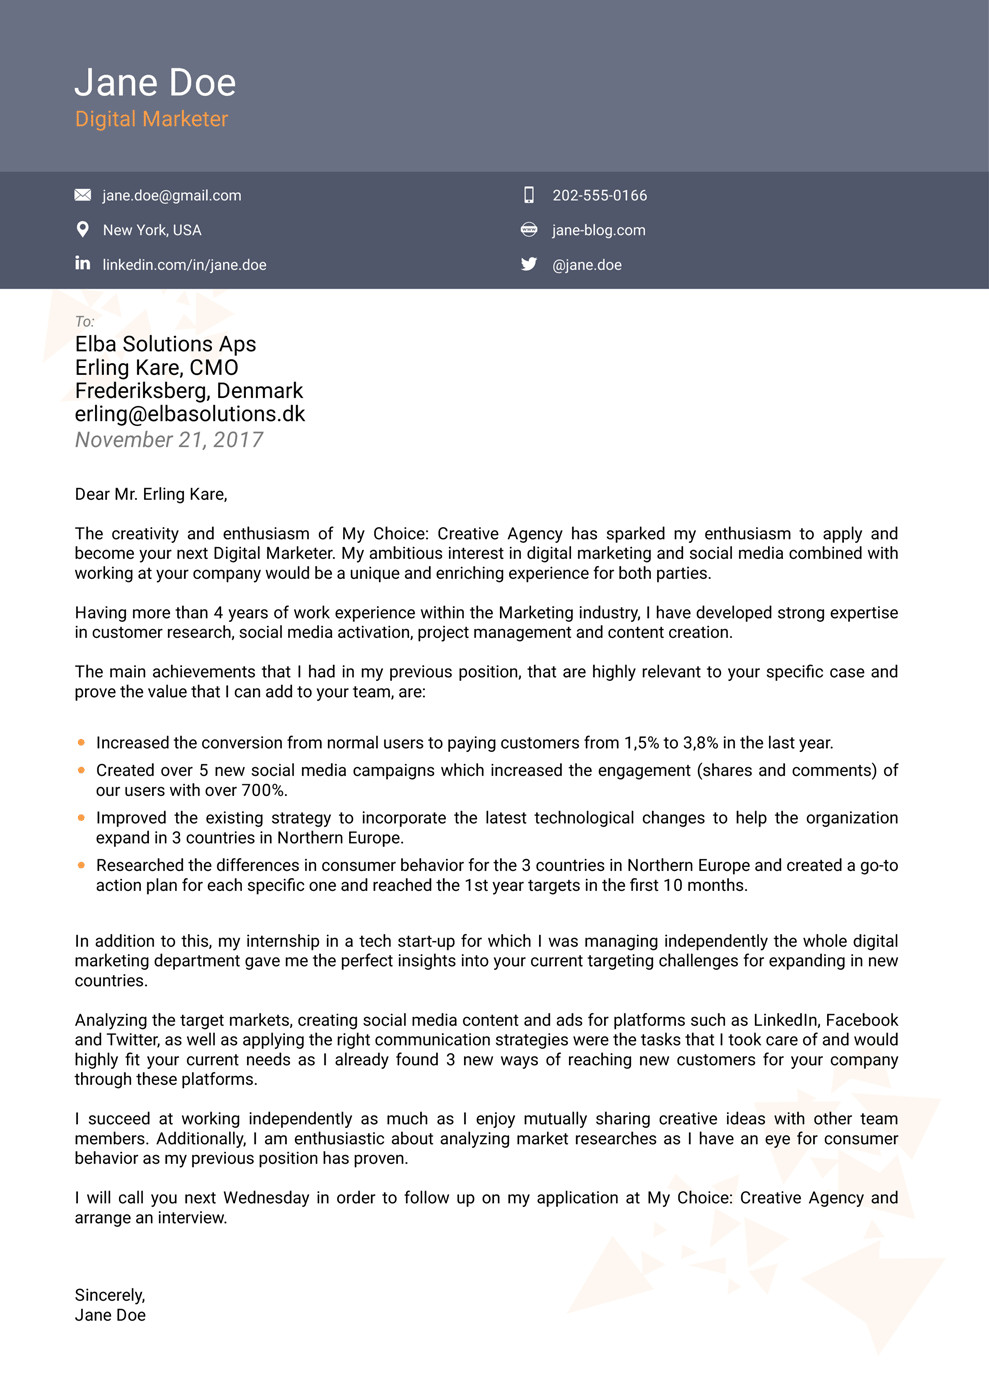 Modern Cover Letter Template 8 Cover Letter Templates for Any Field [updated 2020]